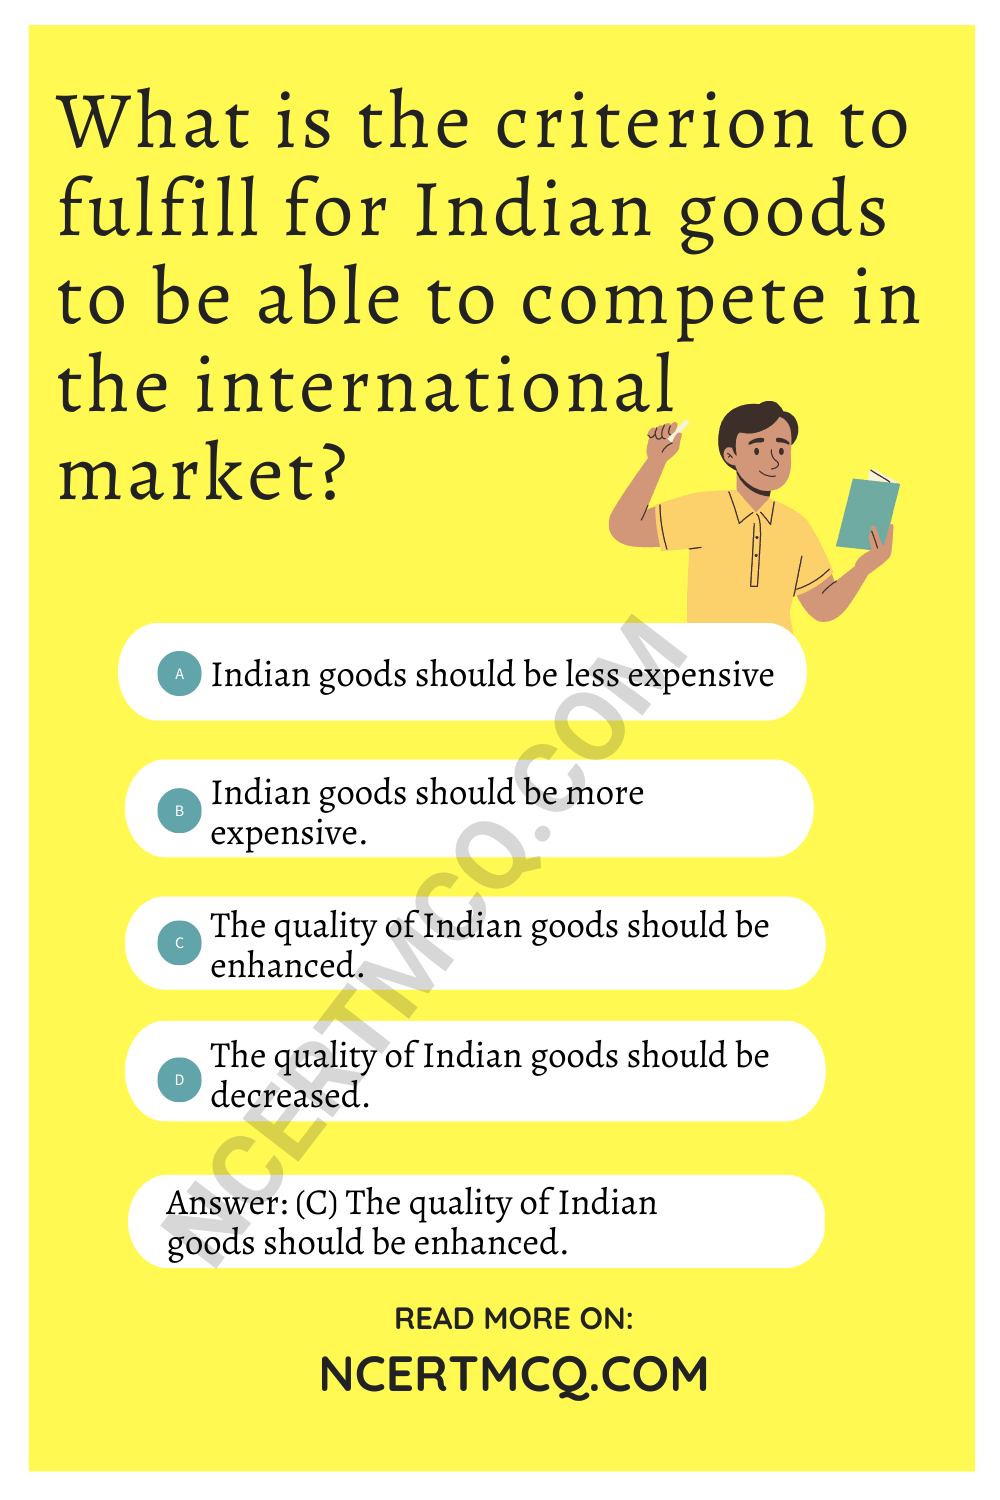  What is the criterion to fulfill for Indian goods to be able to compete in the international market?